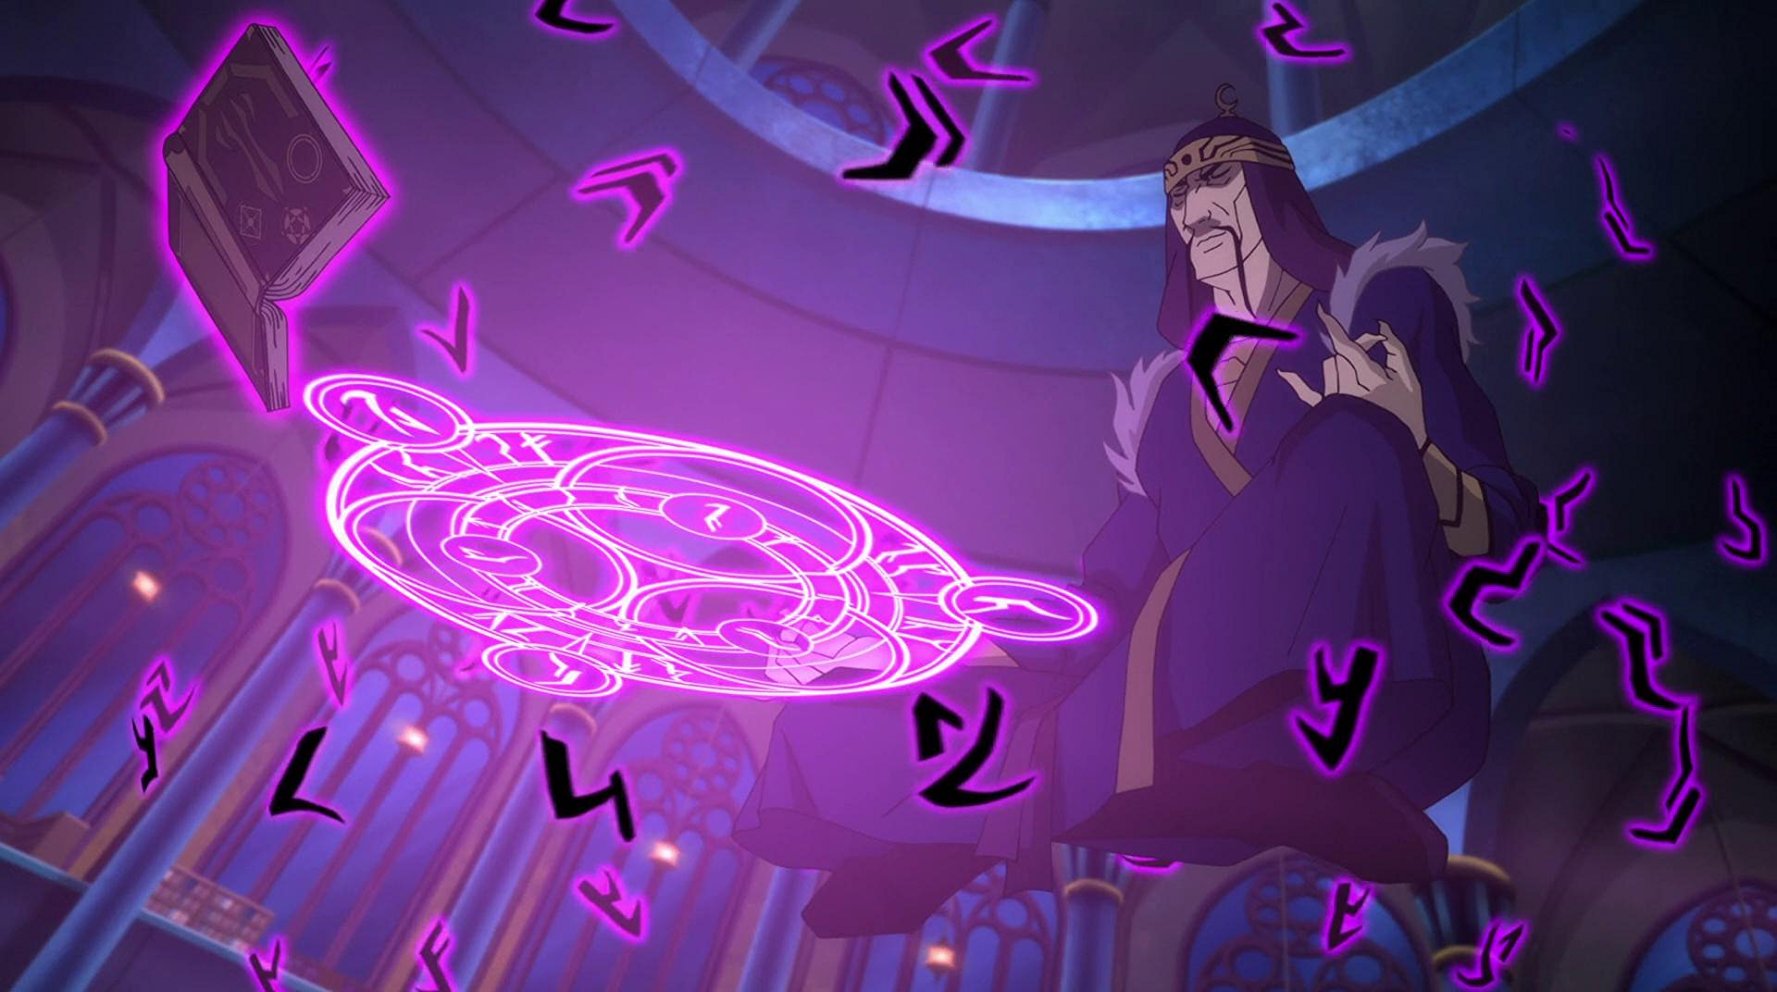 Felix Faust in the DC Animated universe